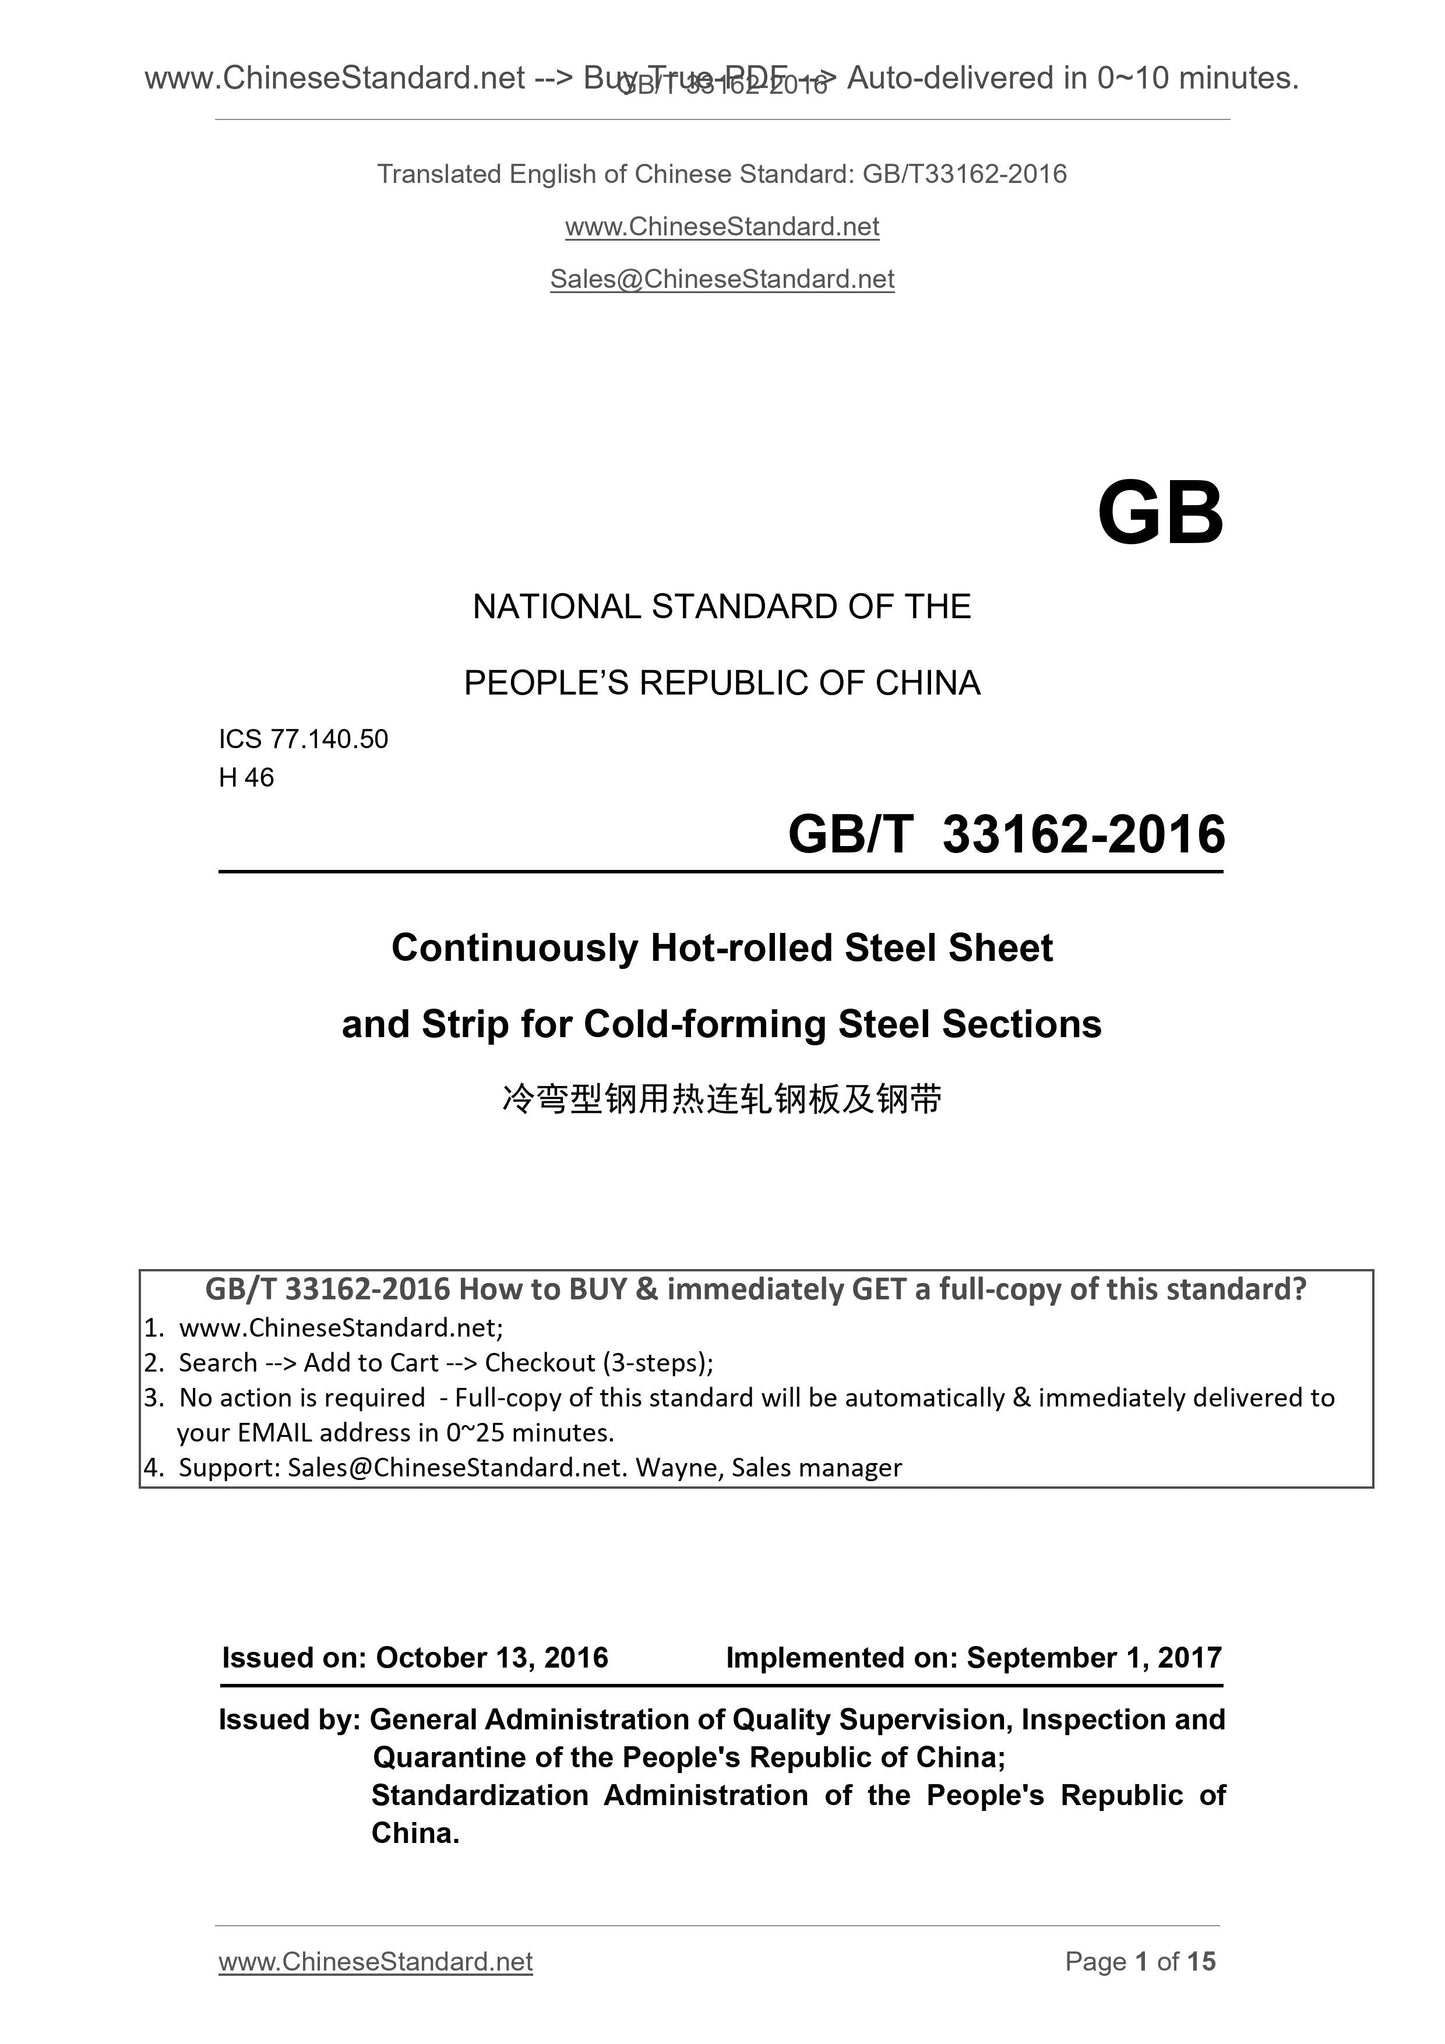 GB/T 33162-2016 Page 1